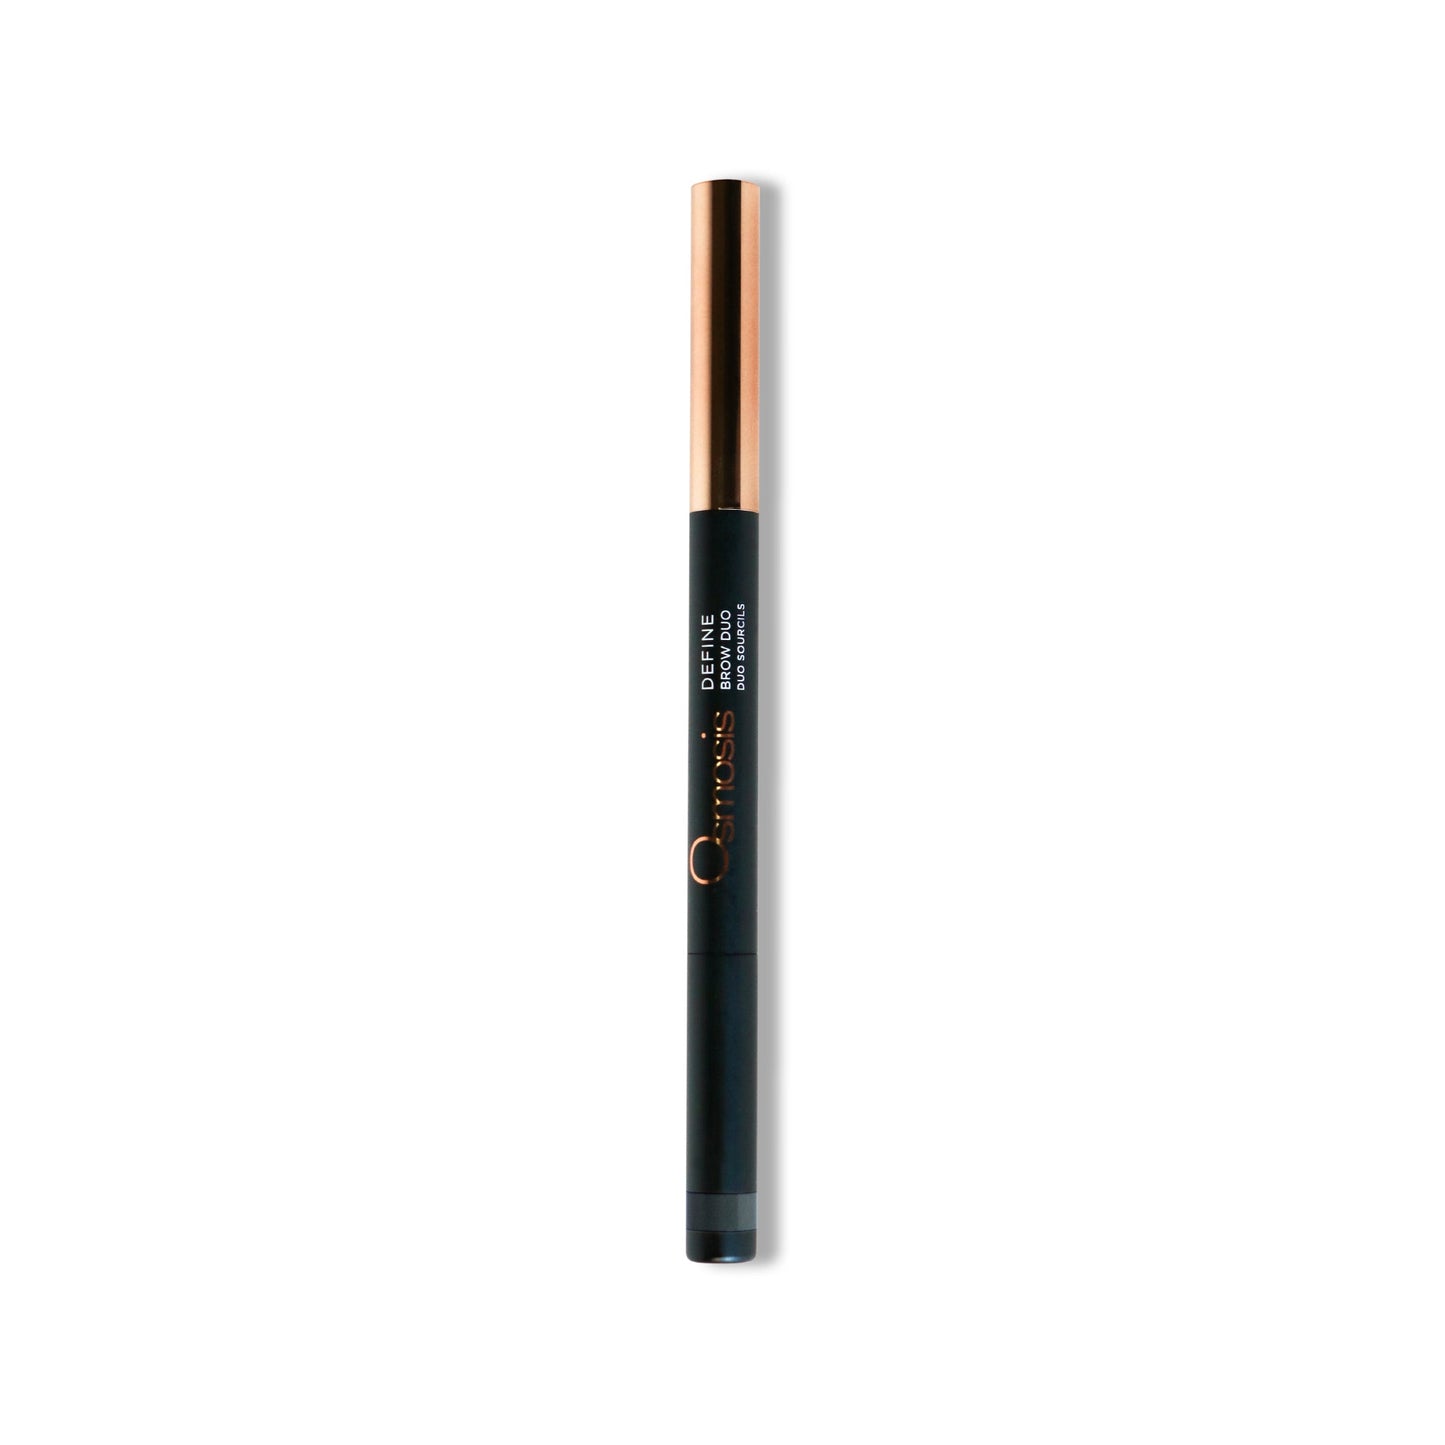 Brow gel and pencil duo color Caramel  by Osmosis Beauty makeup